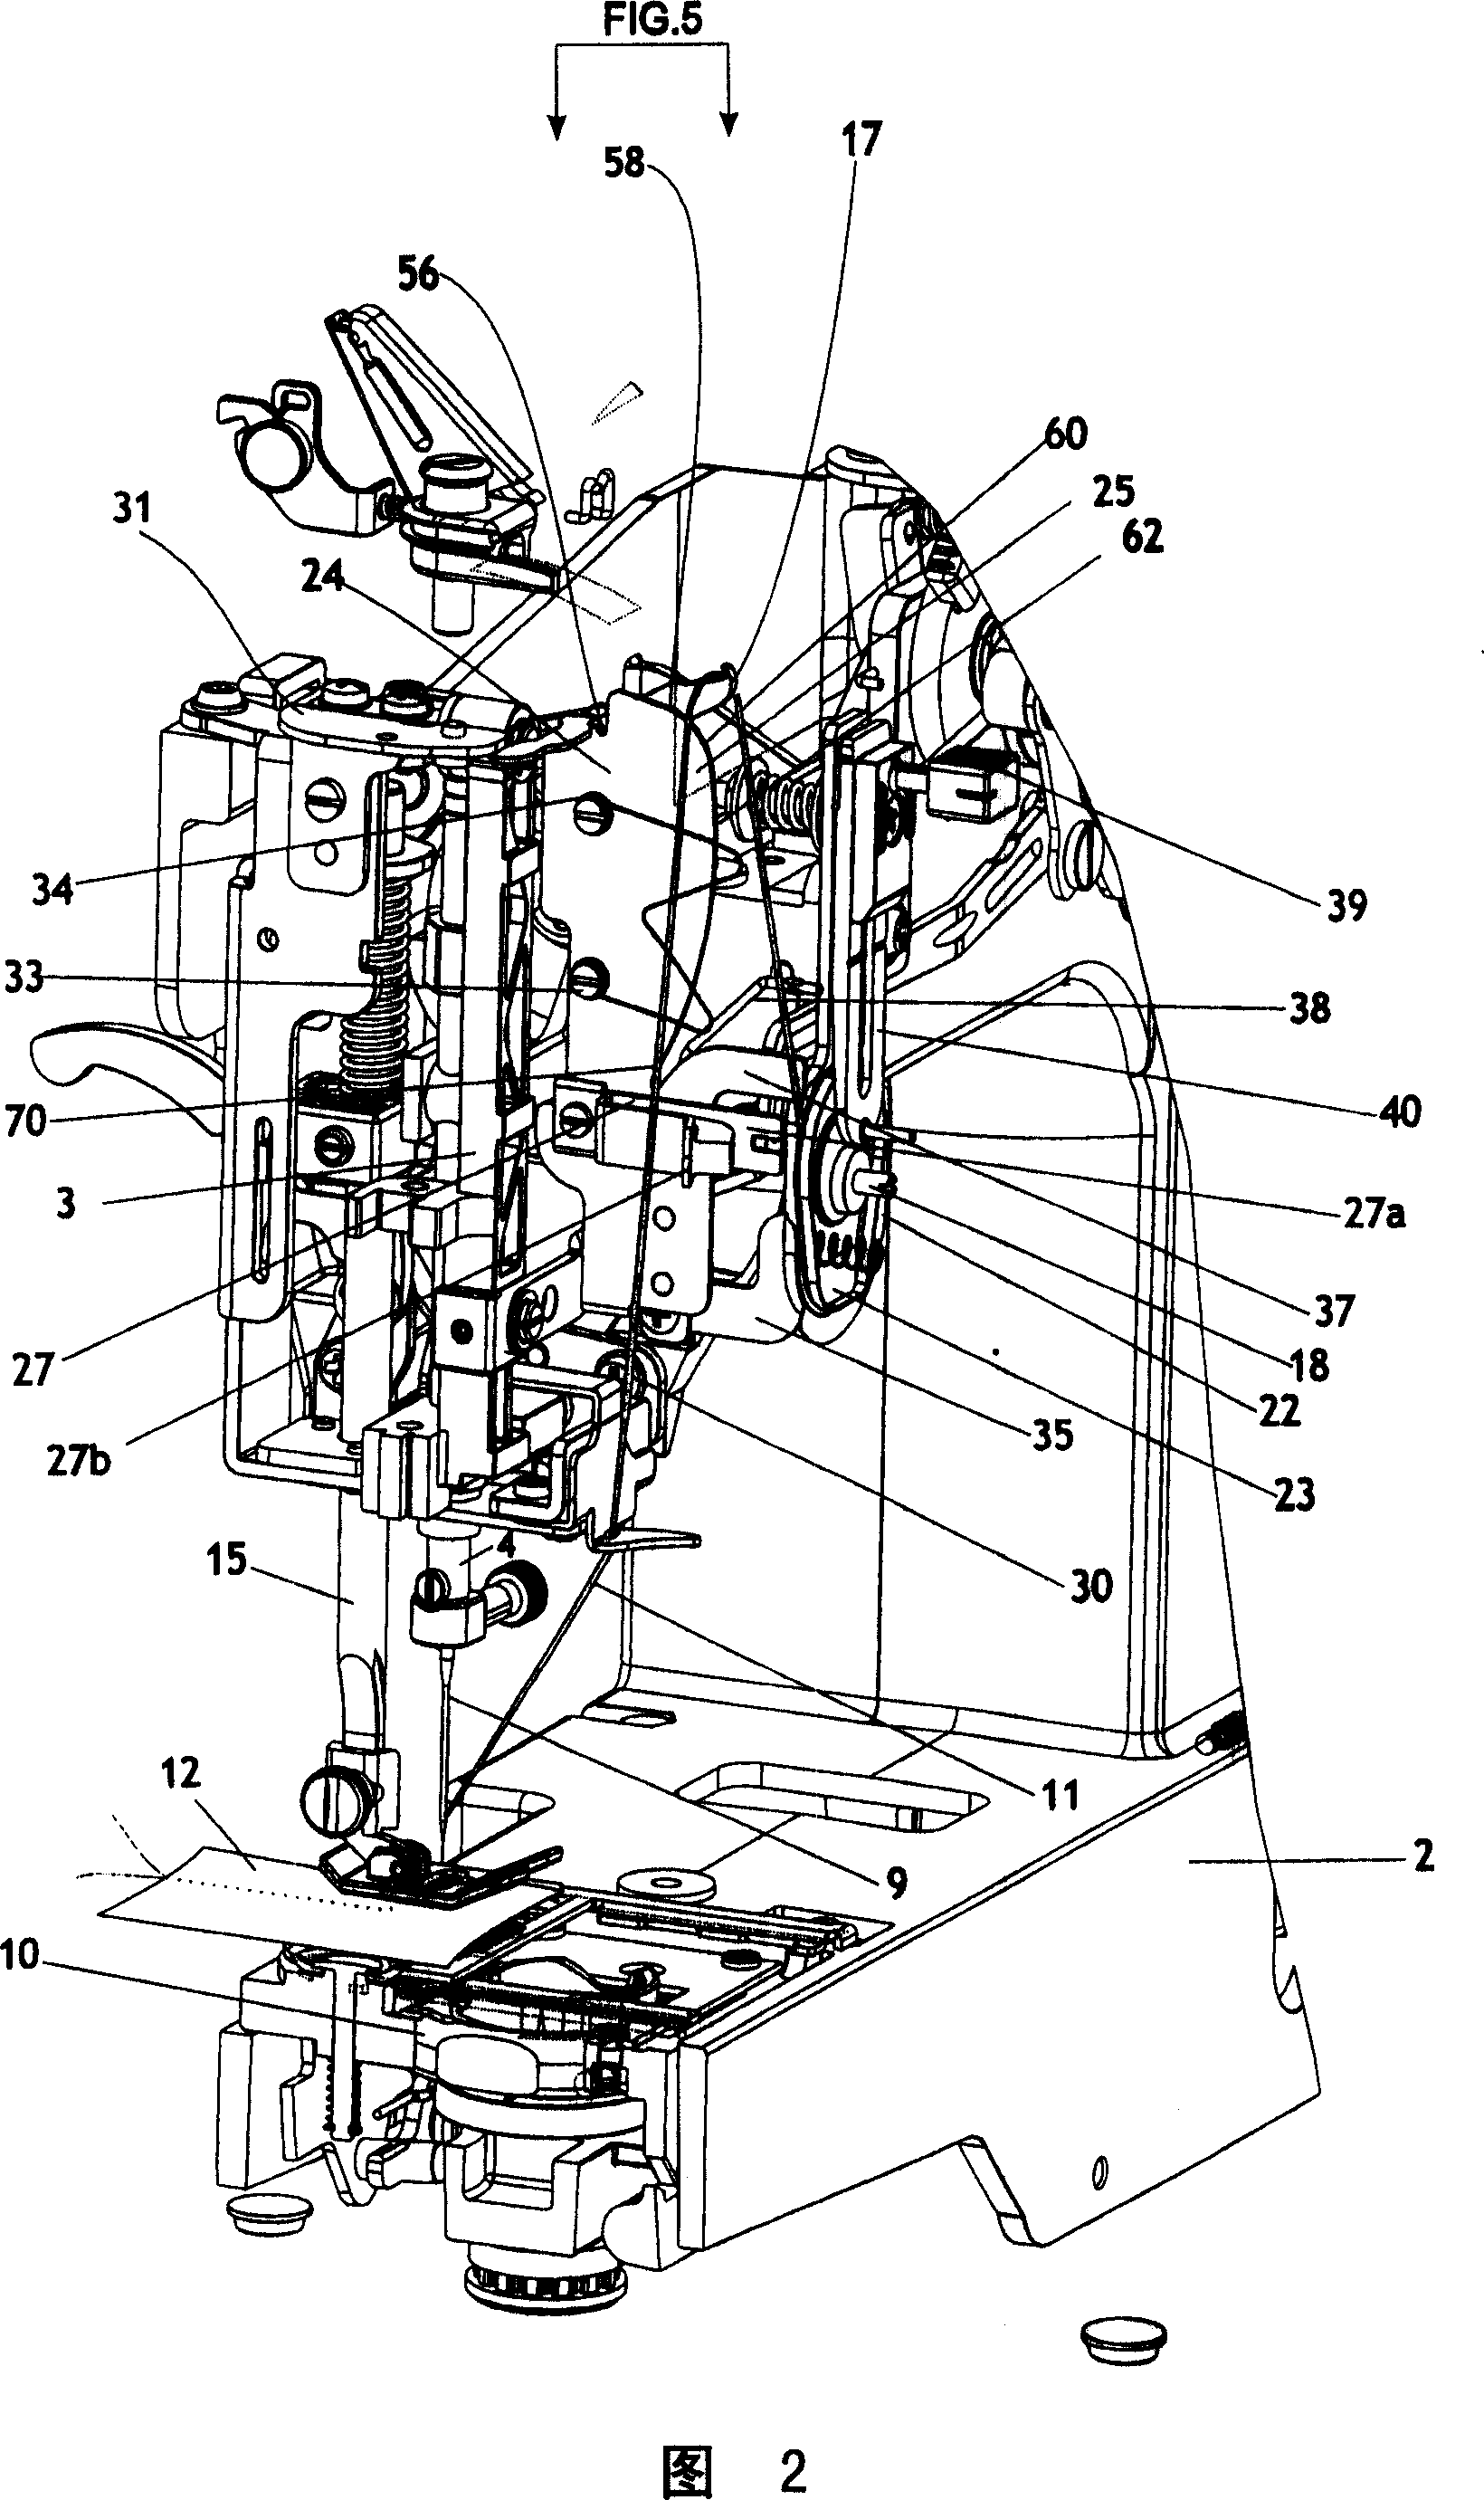 Thread control device for a sewing machine